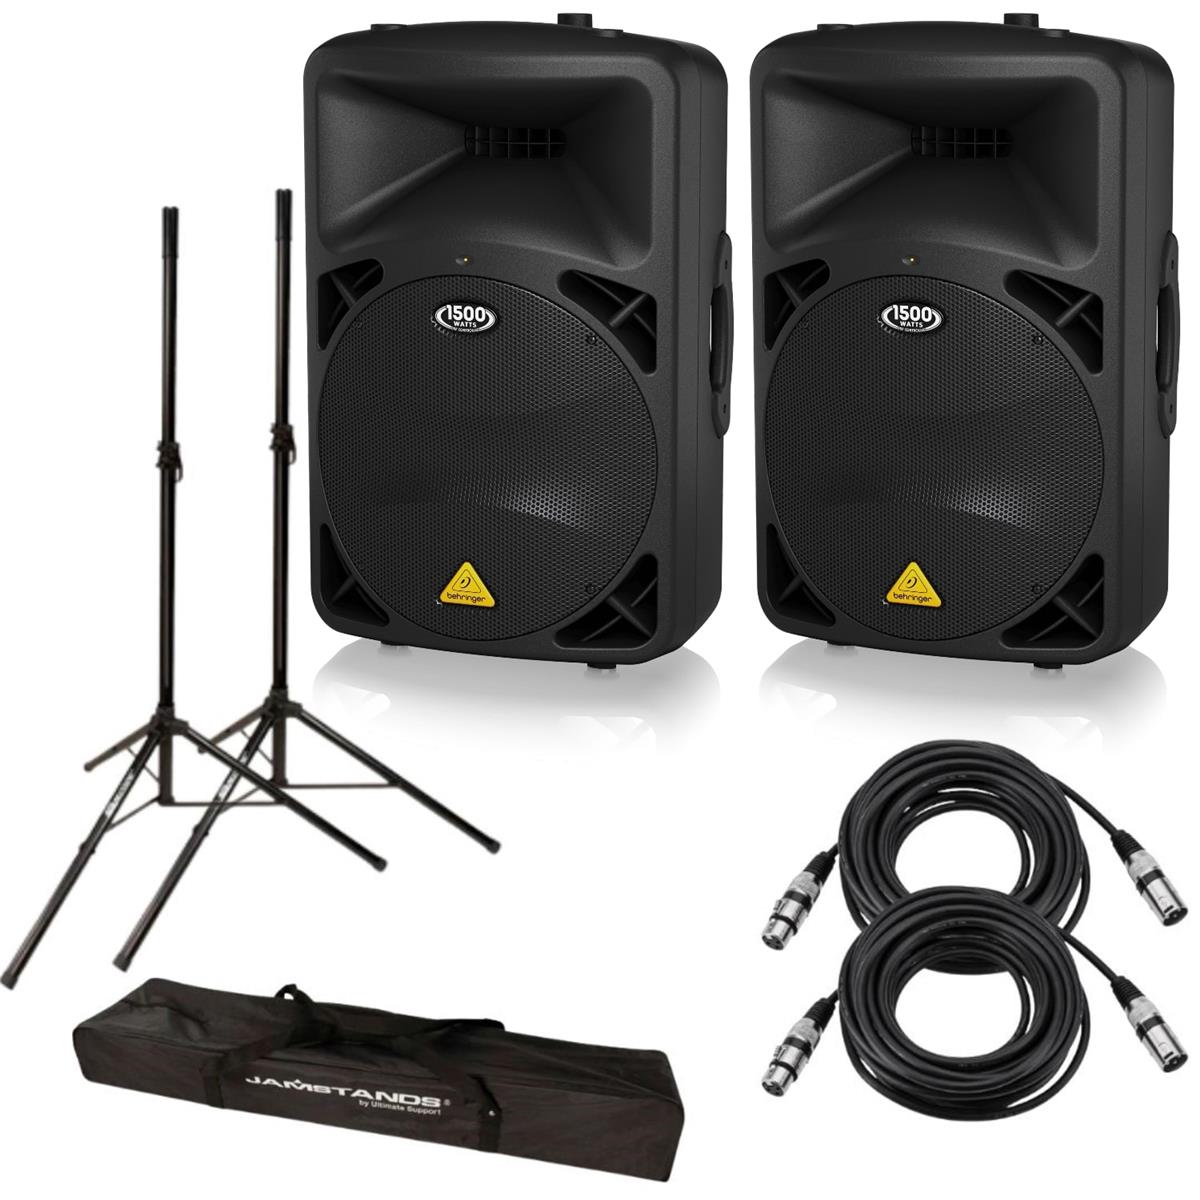 2x ctive 1500-Watt 2-Way PA Speaker System W/2x Mic Cable/Stand - Behringer B615D A